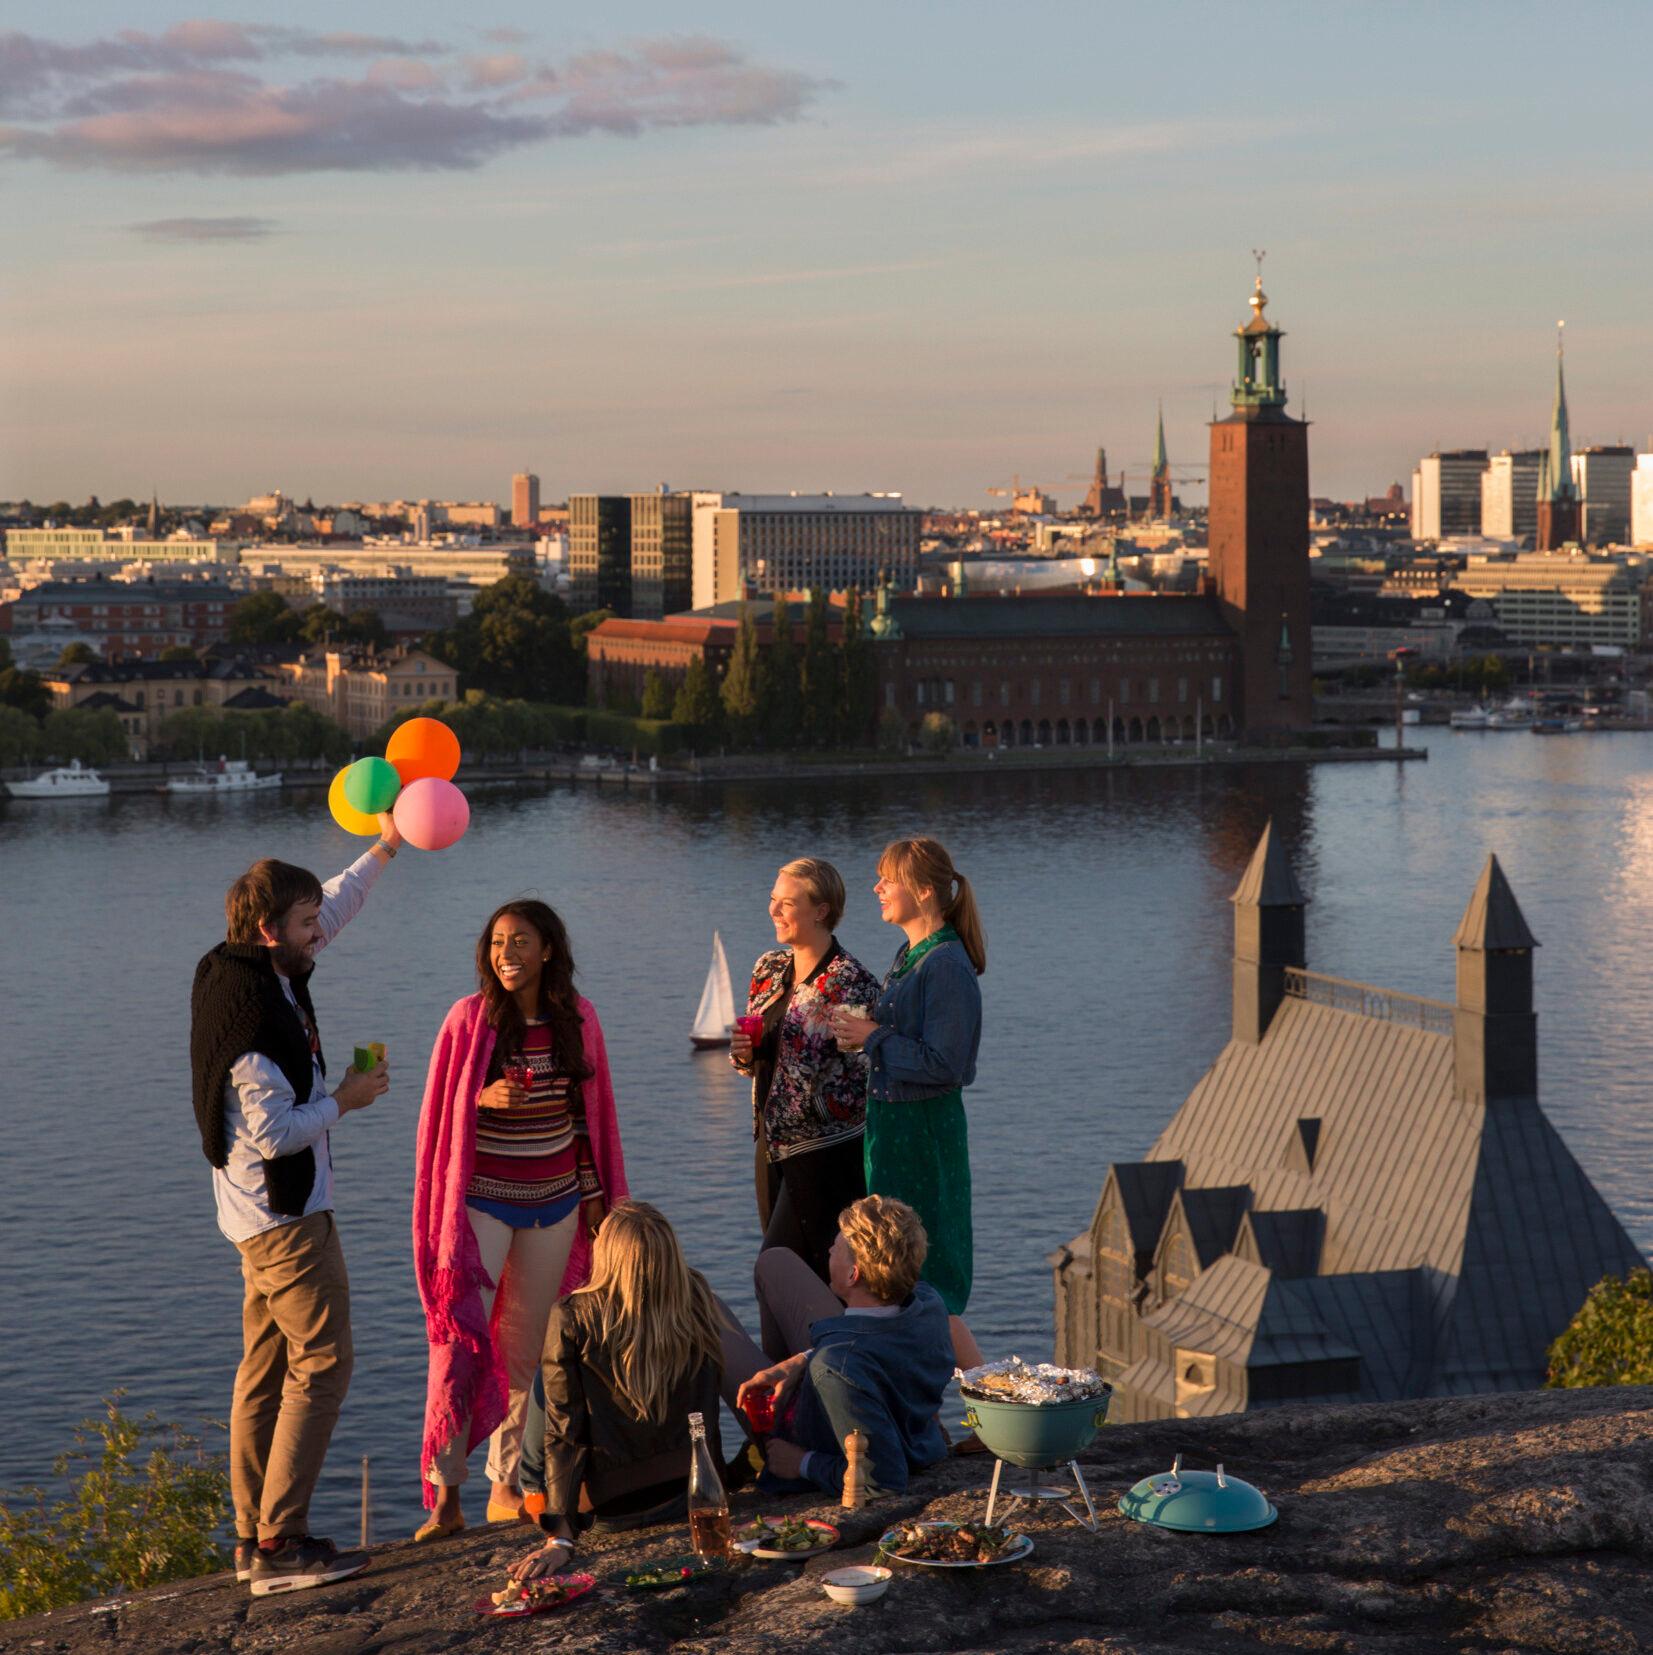 Five people having a barbecue on a tall hill overlooking stockholm. One man is holding colourful baloons. In the background is Stockholm City Hall.